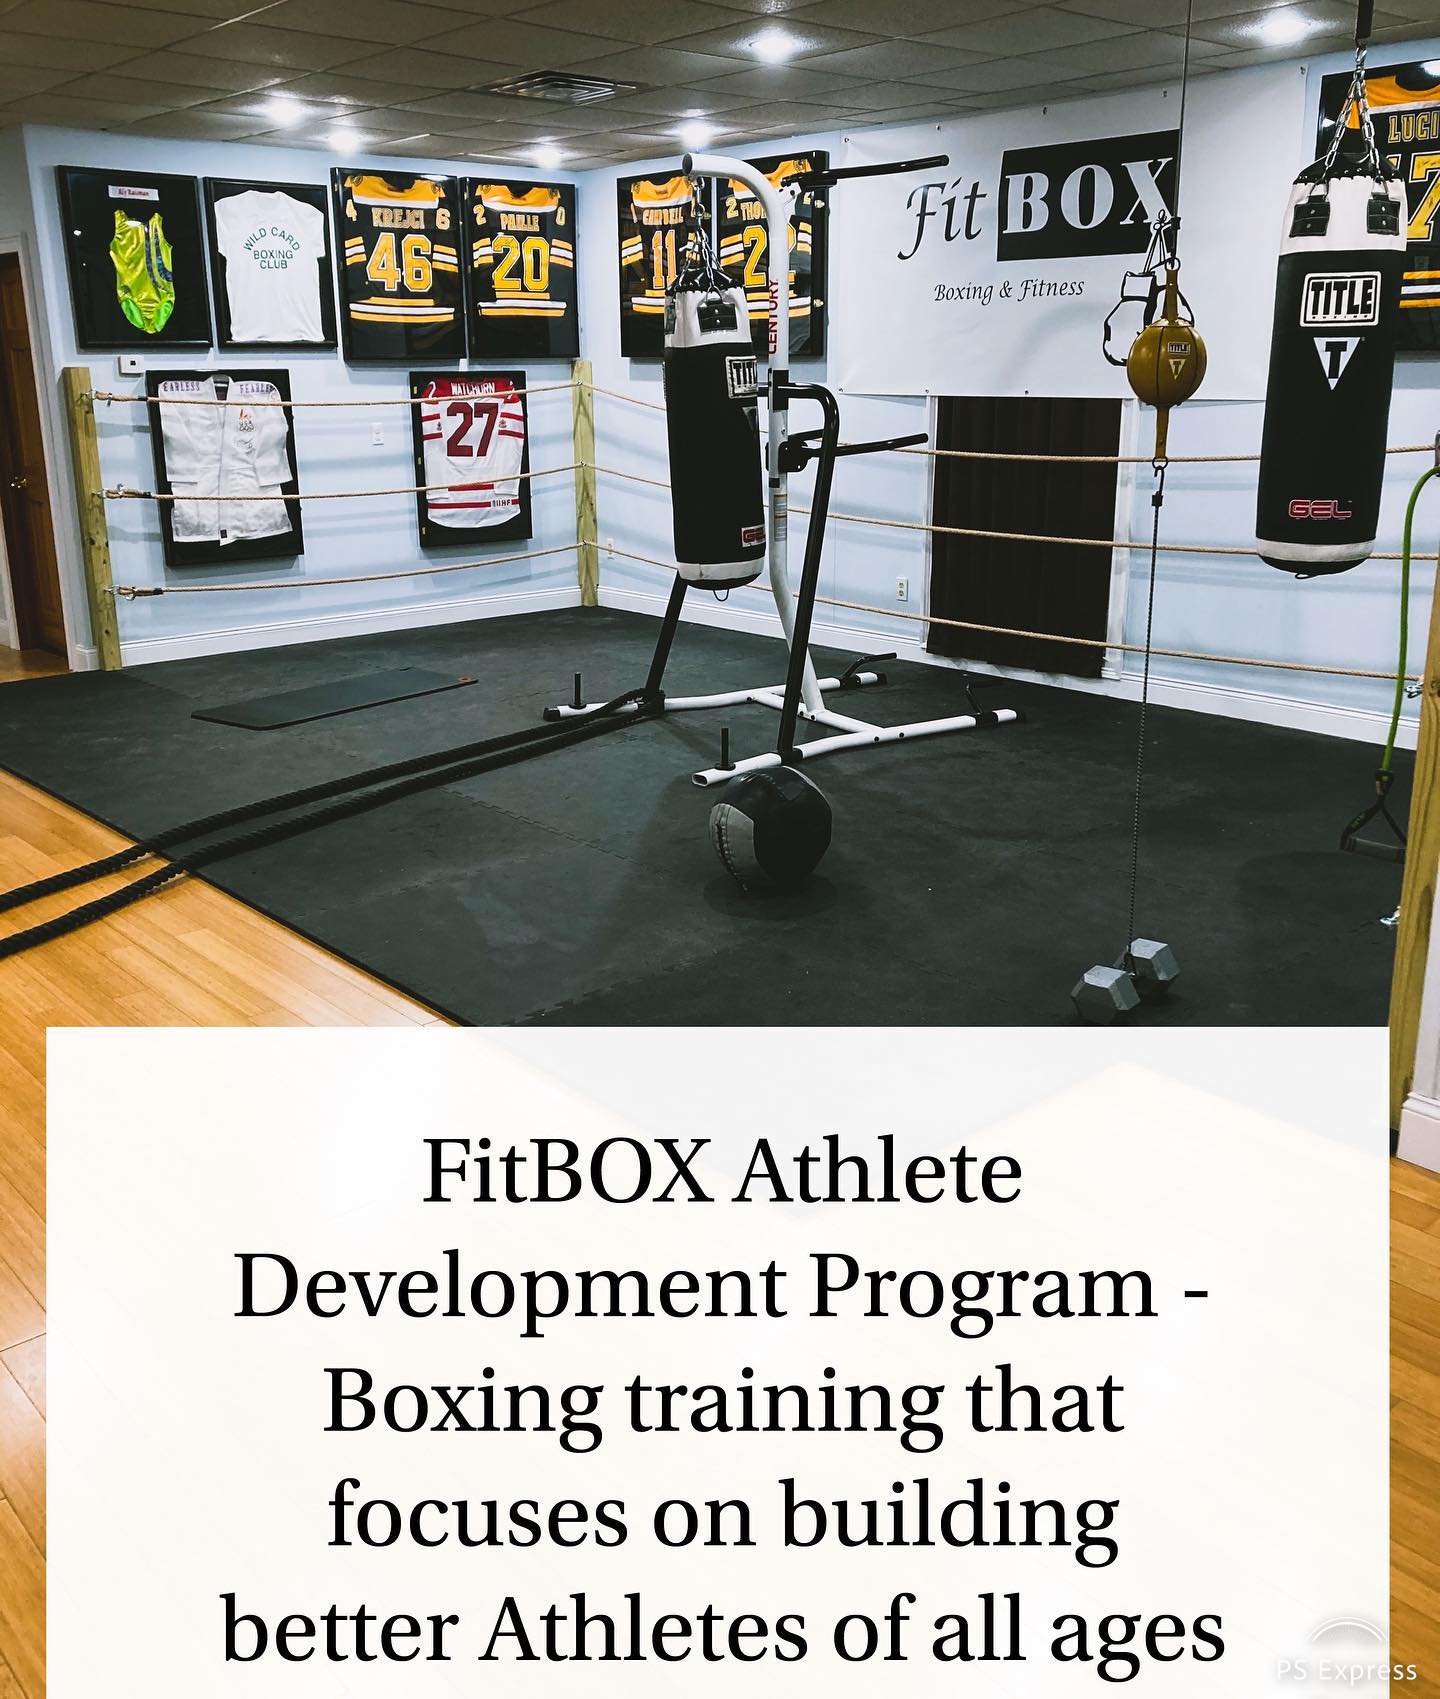 FitBOX Athlete Development program . . Head boxing trainer @tommymcinerney has designed boxing sessions that focus on helping the development of a Athletes physical and athletic skills . For more information on this program please contact us at call/text (781)727-9503 or email fitbox@outlook.com .
.